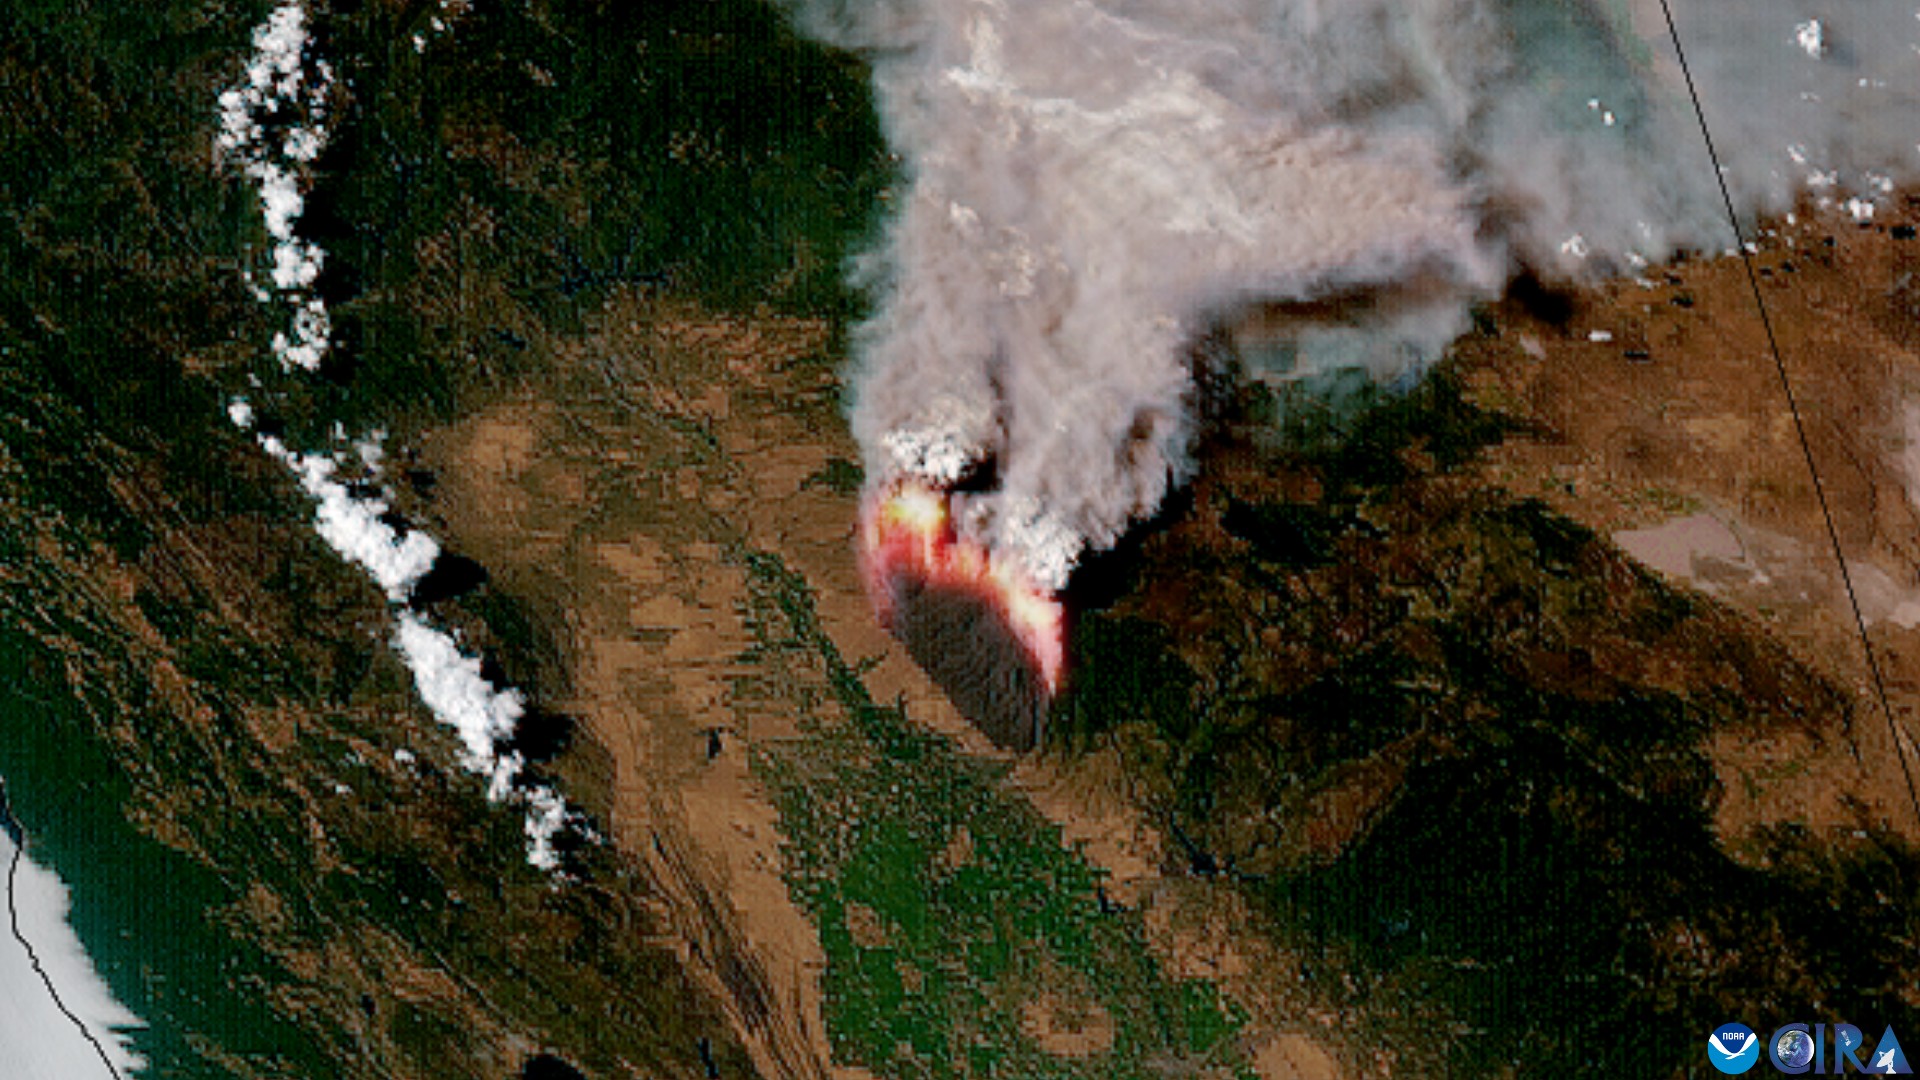  Park Fire rages across California in stunning satellite video 